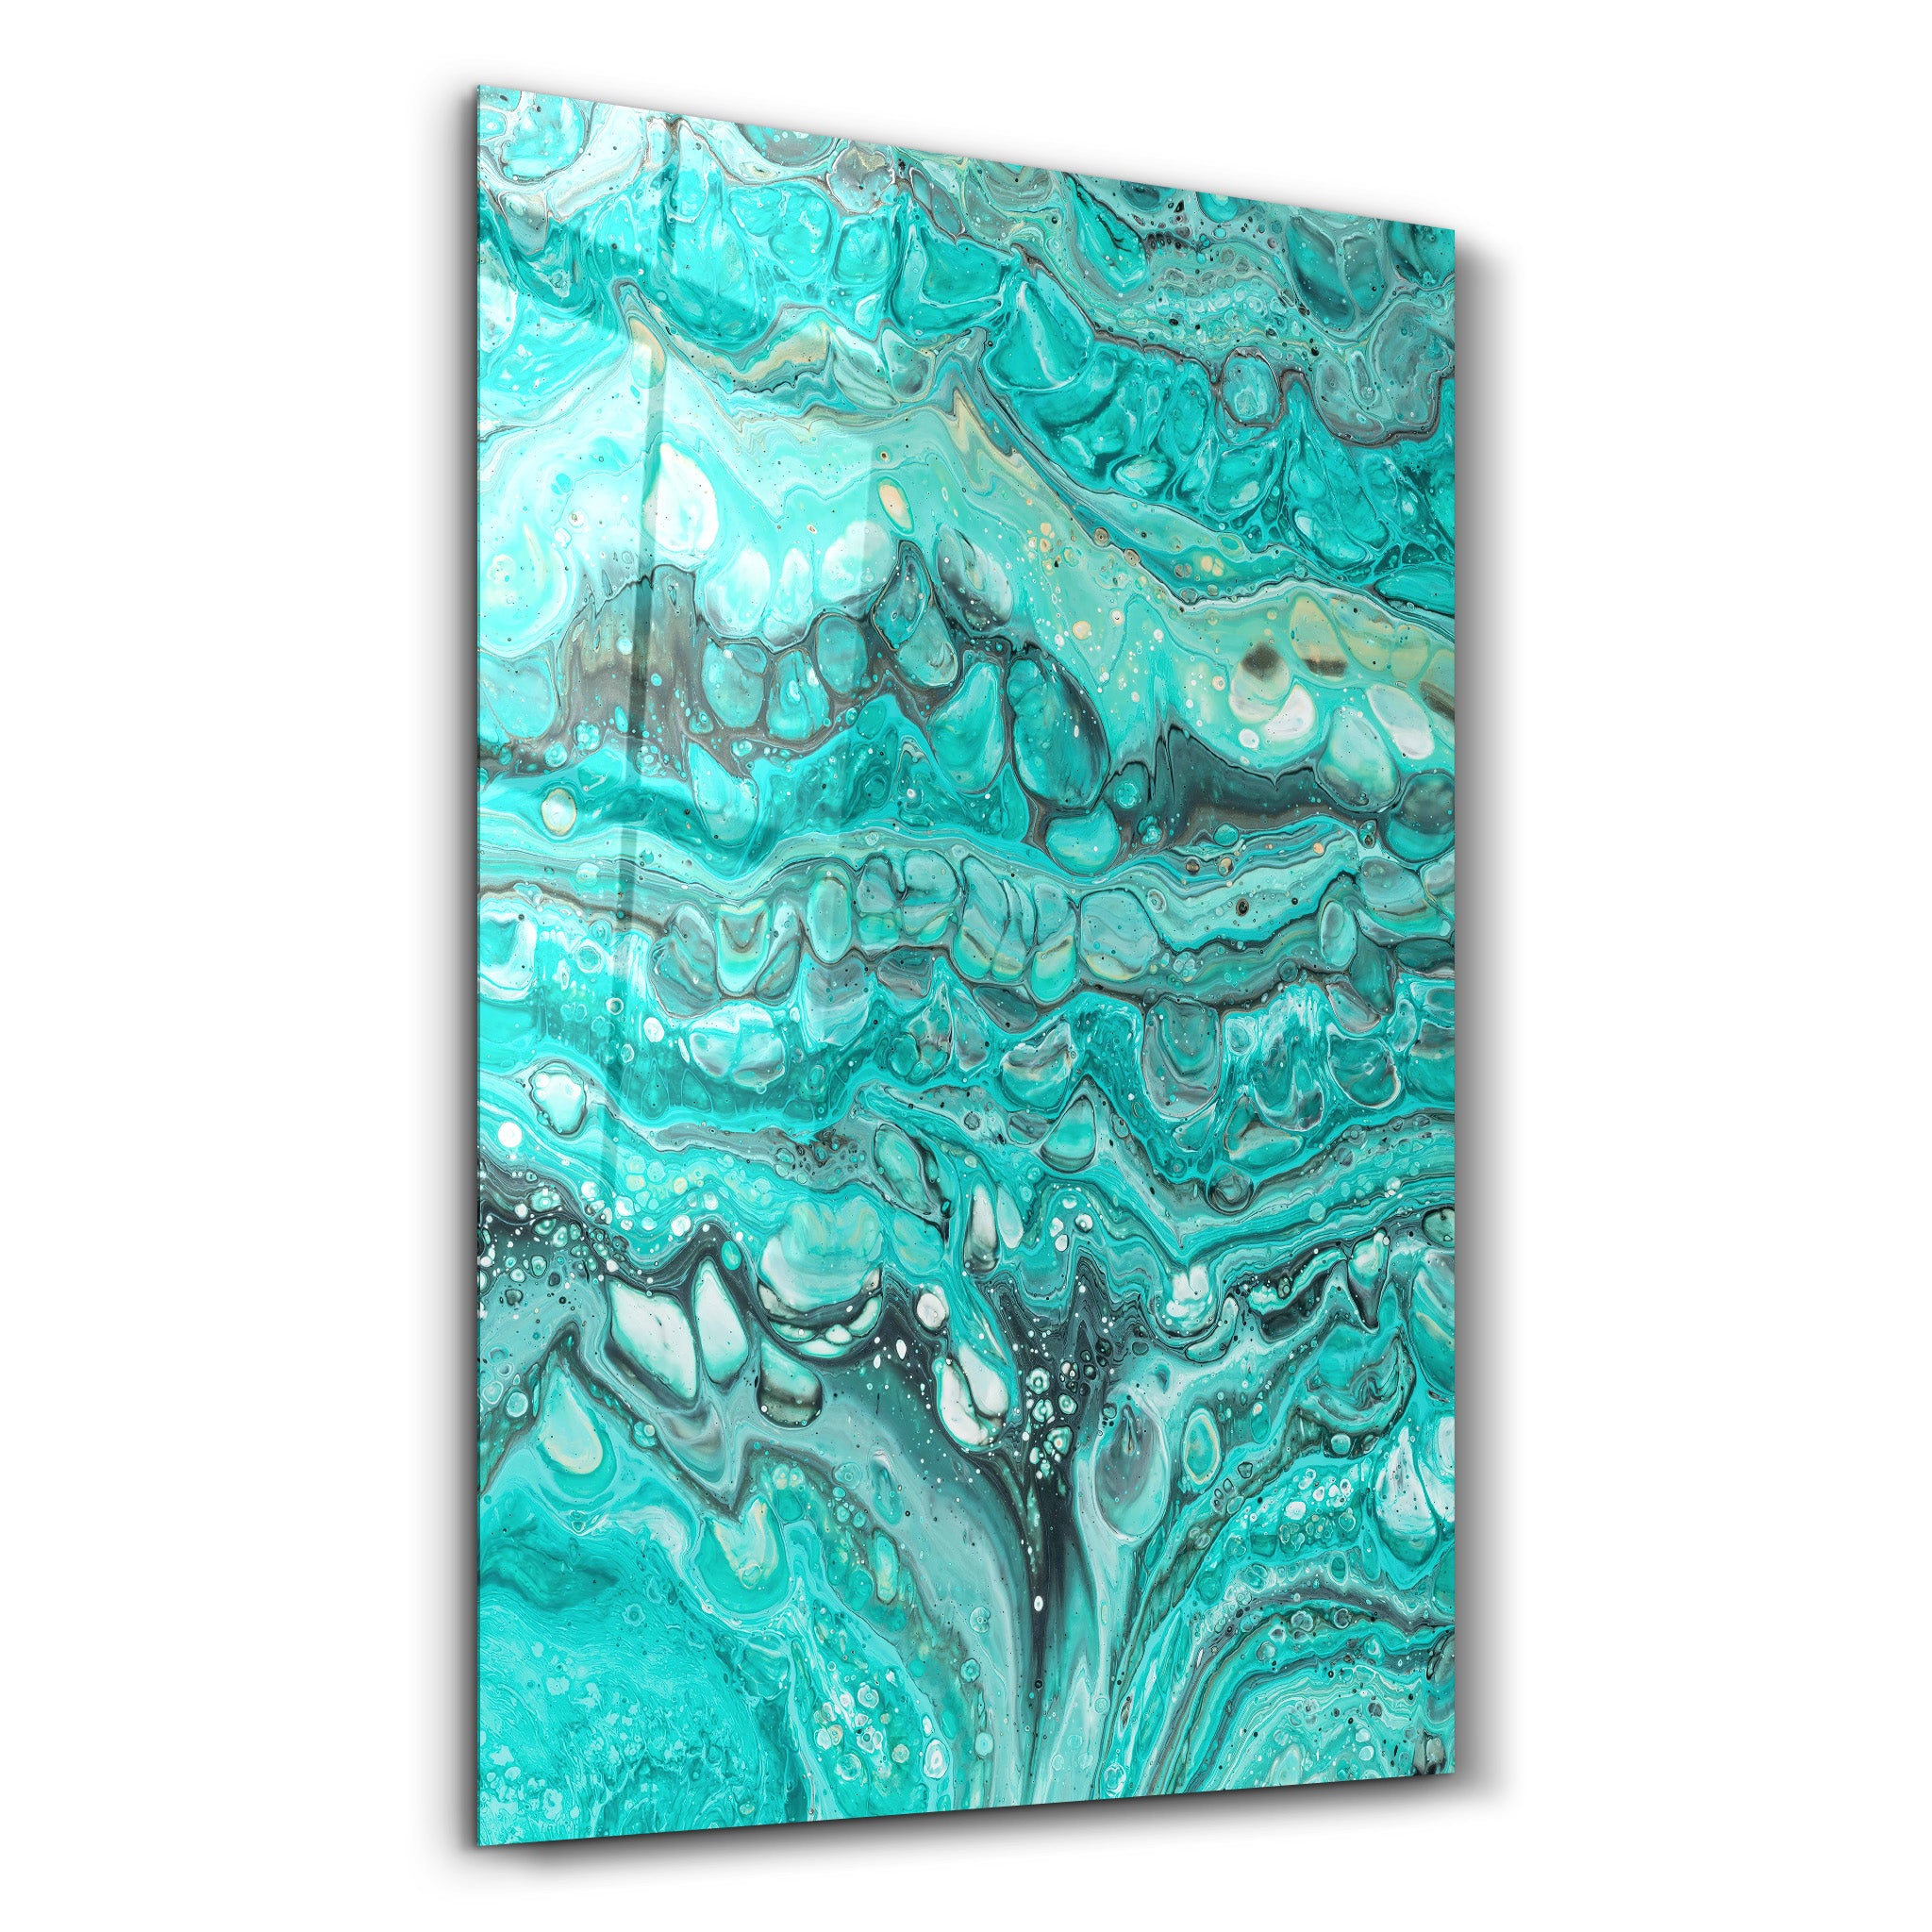 ・"Abstract Turquoise Ink Drops"・Designer's Collection Glass Wall Art - ArtDesigna Glass Printing Wall Art